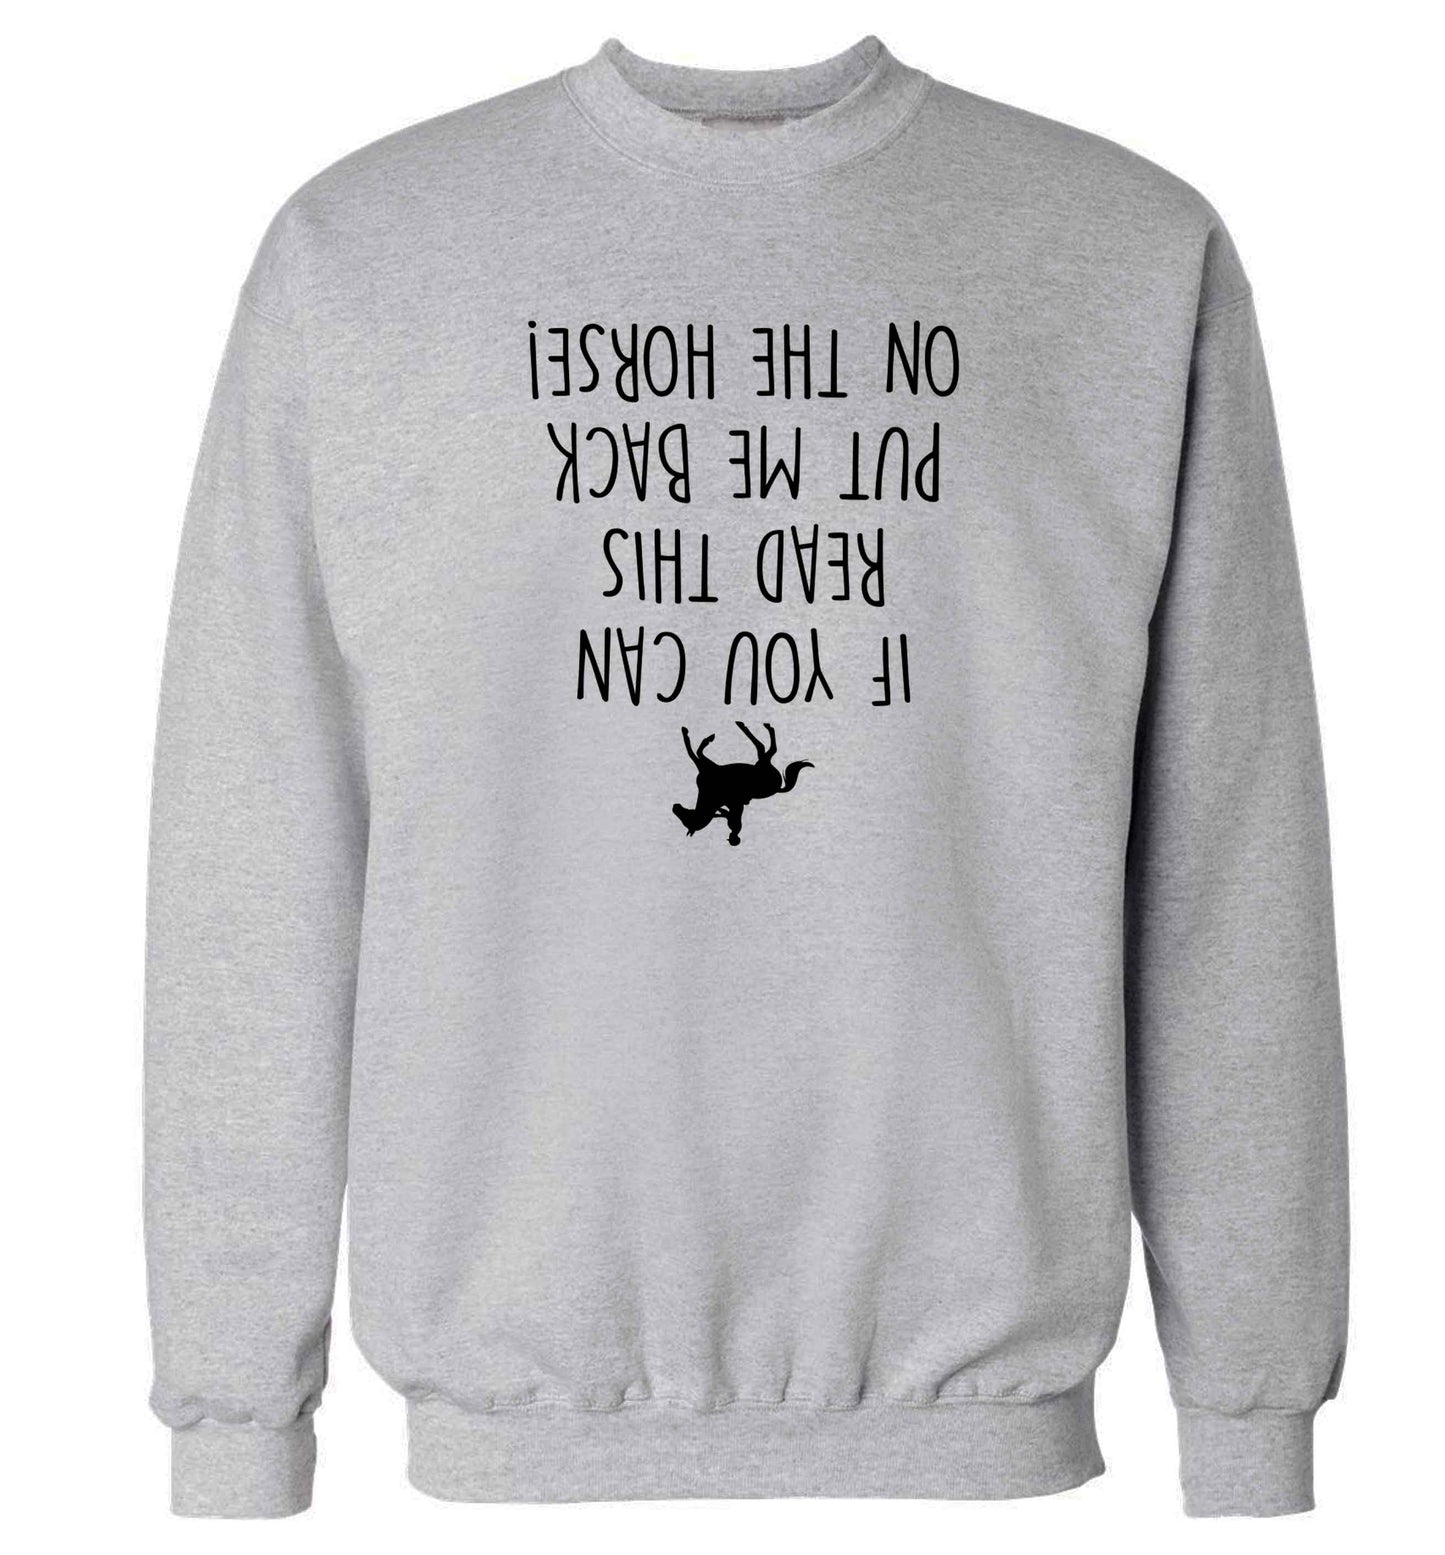 If you can read this put me back on the horse adult's unisex grey sweater 2XL